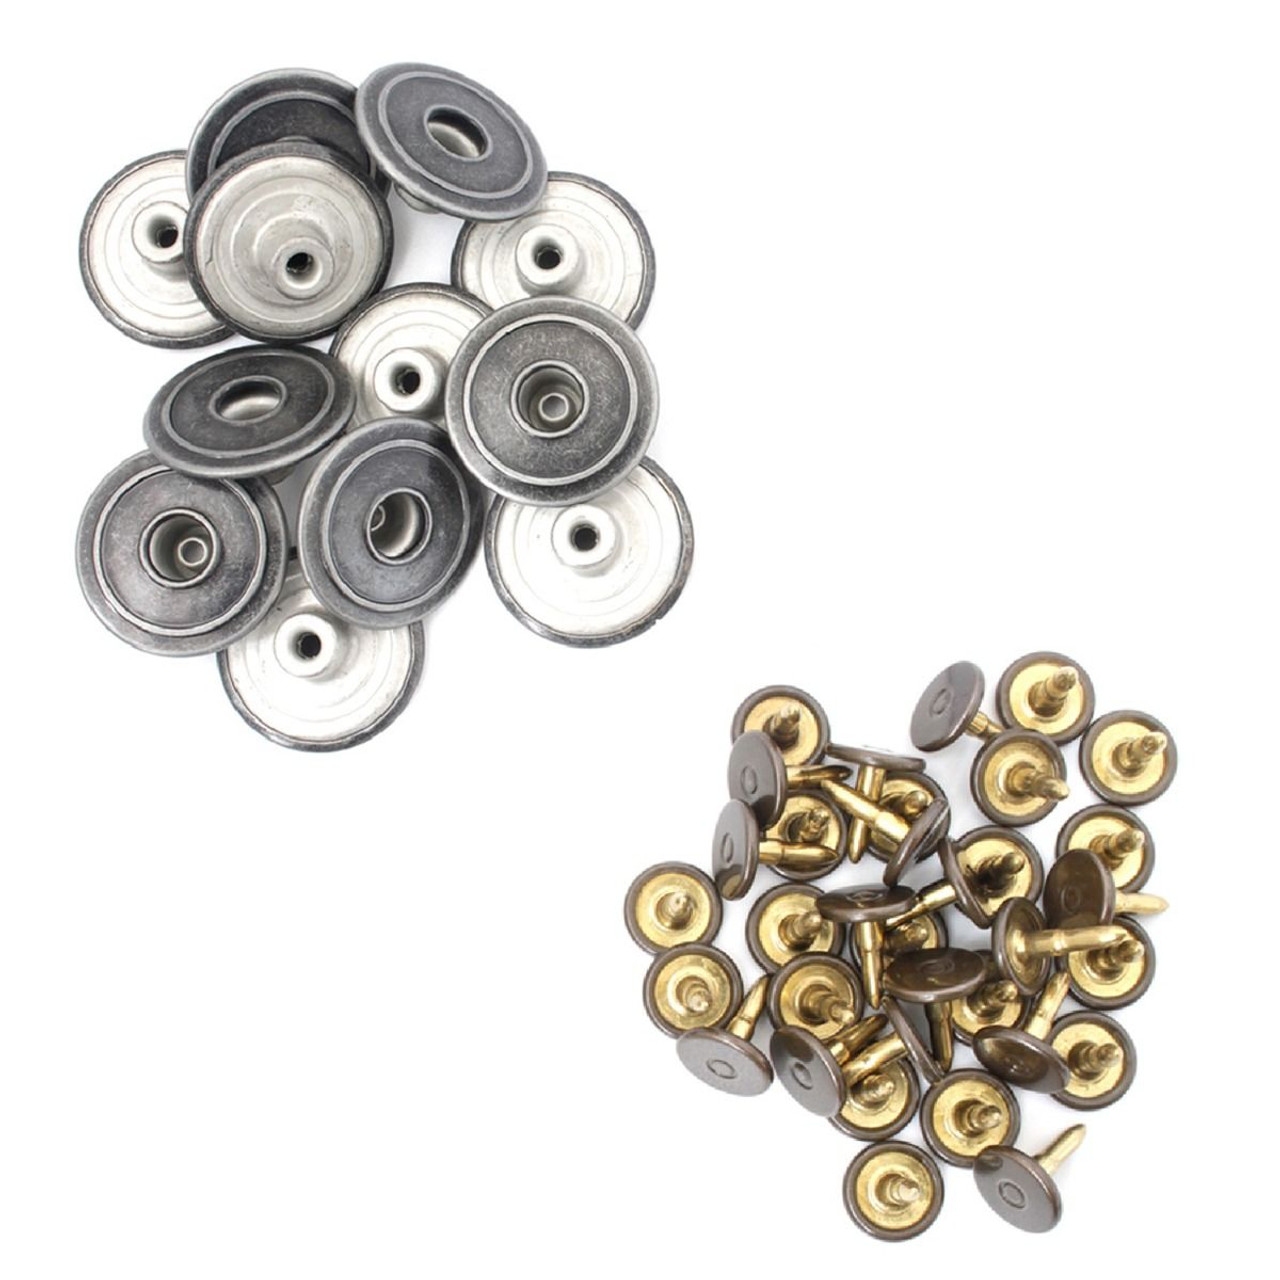 10pcs Round Flat Metal Buttons For Sewing Garment Jeans Coat Accessories  Shank